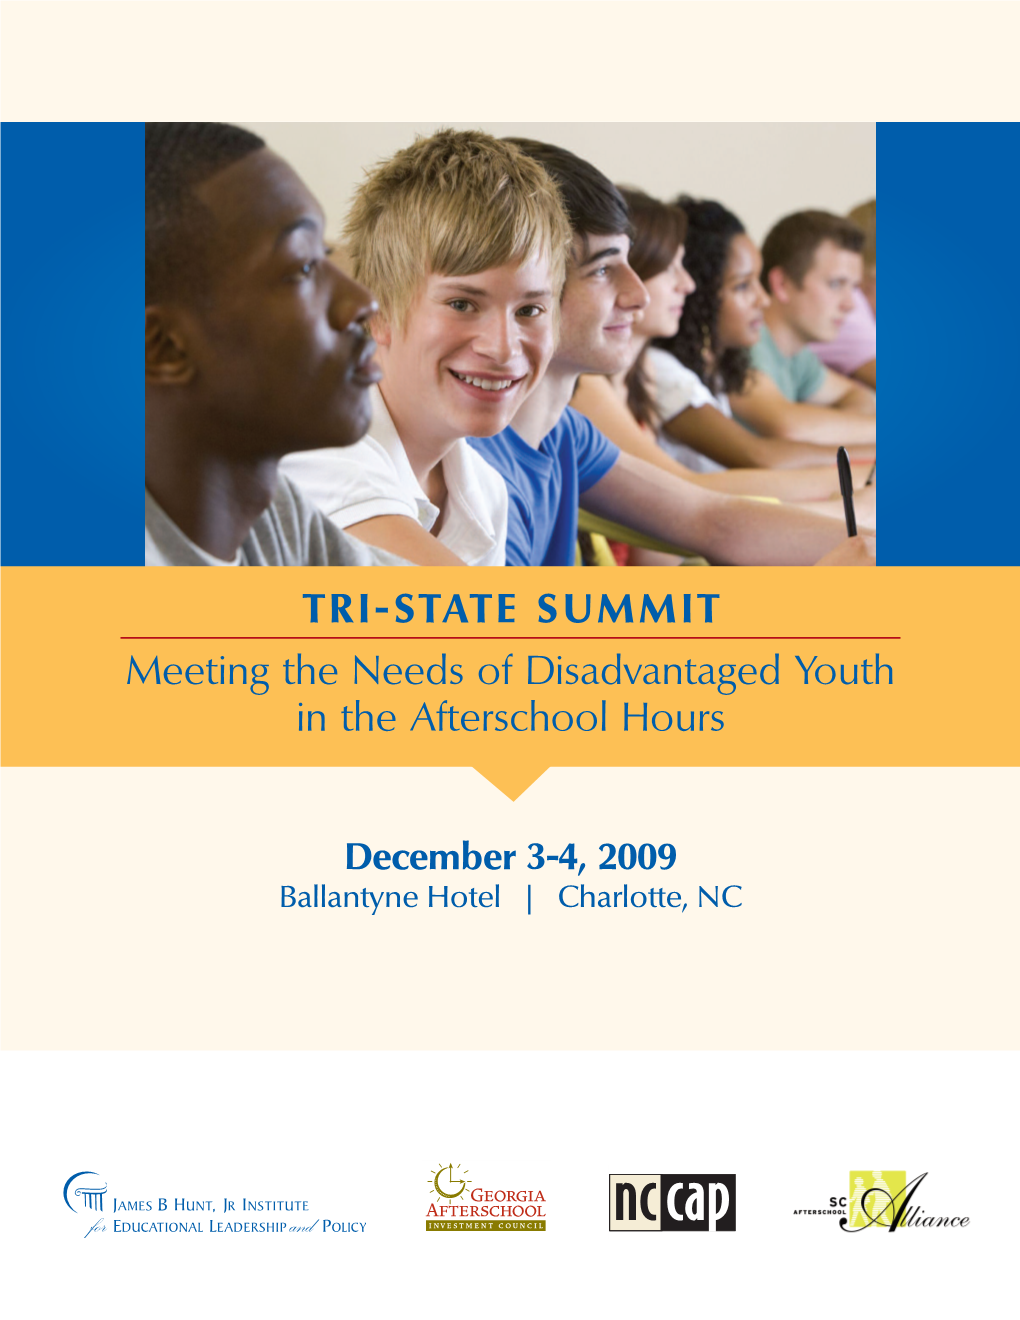 TRI-STATE SUMMIT Meeting the Needs of Disadvantaged Youth in the Afterschool Hours